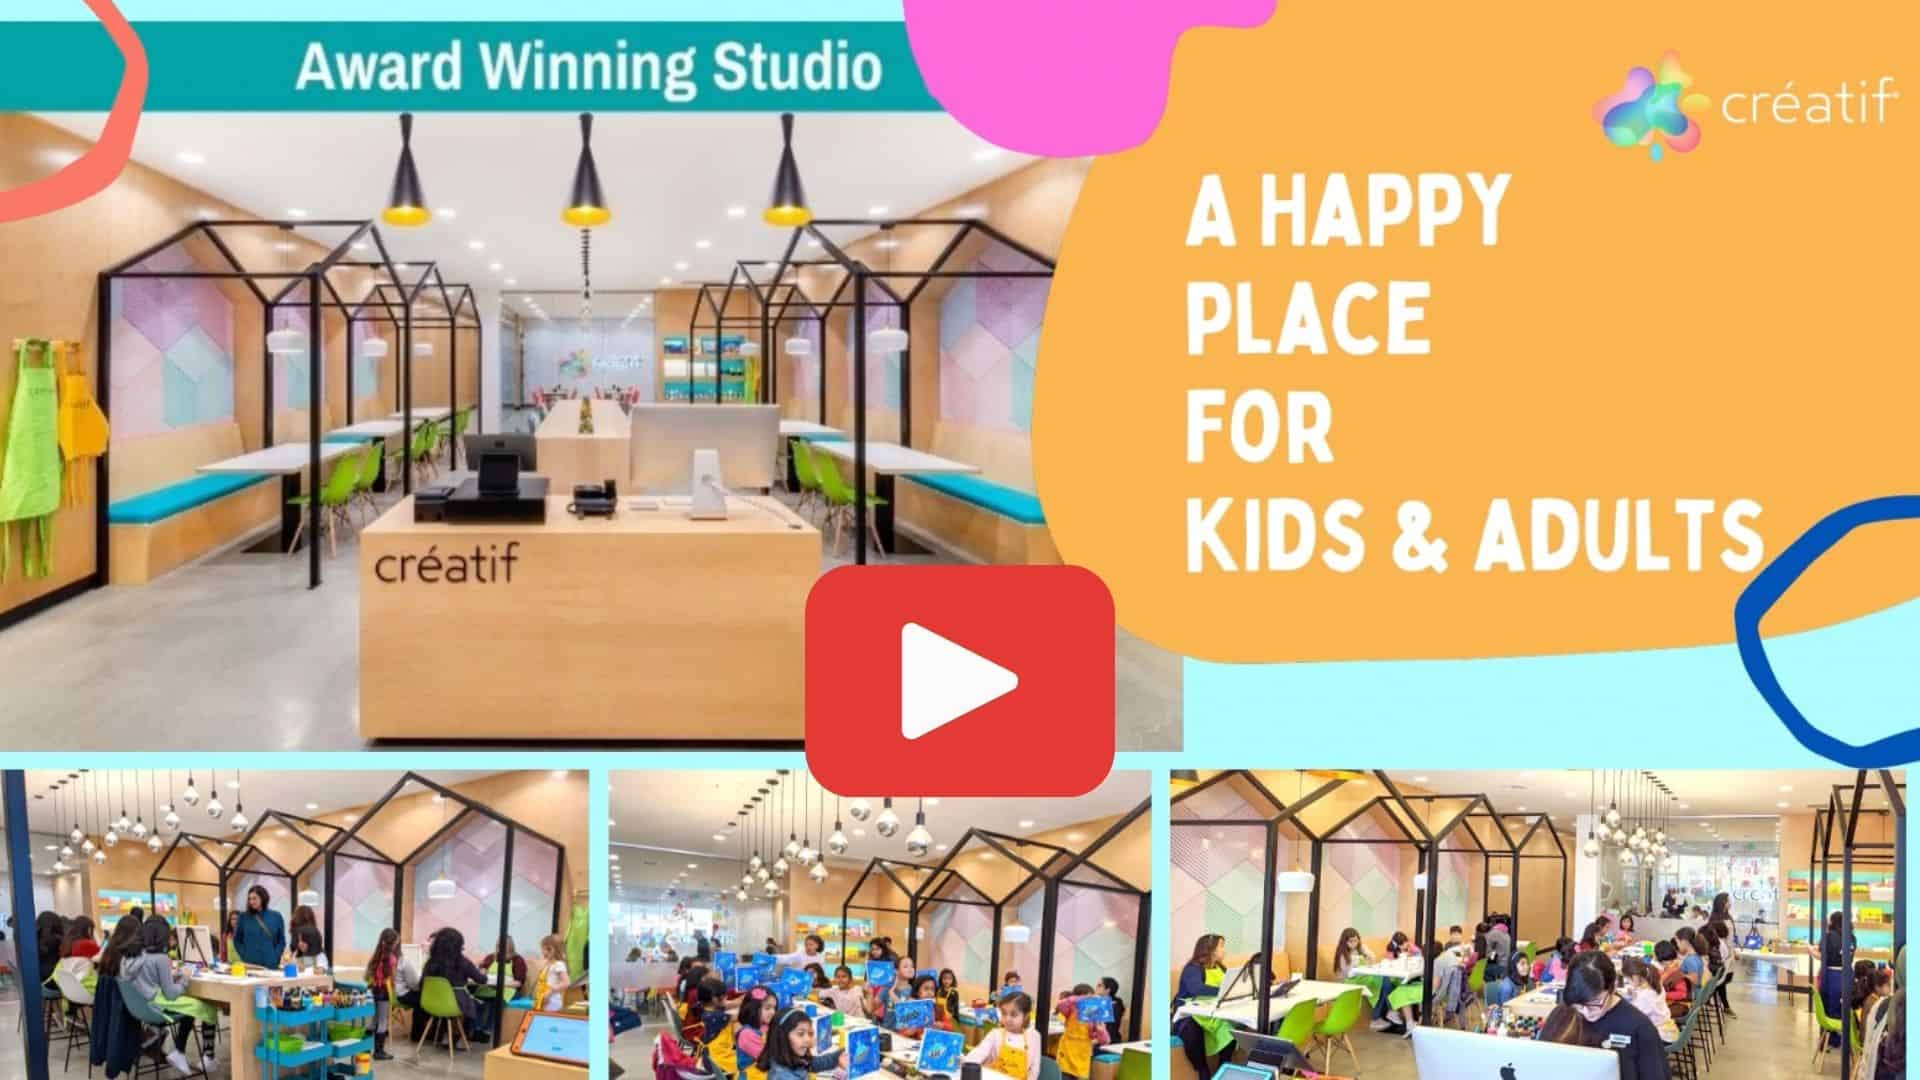 Creatif - A Happy Place for Kids and Adults